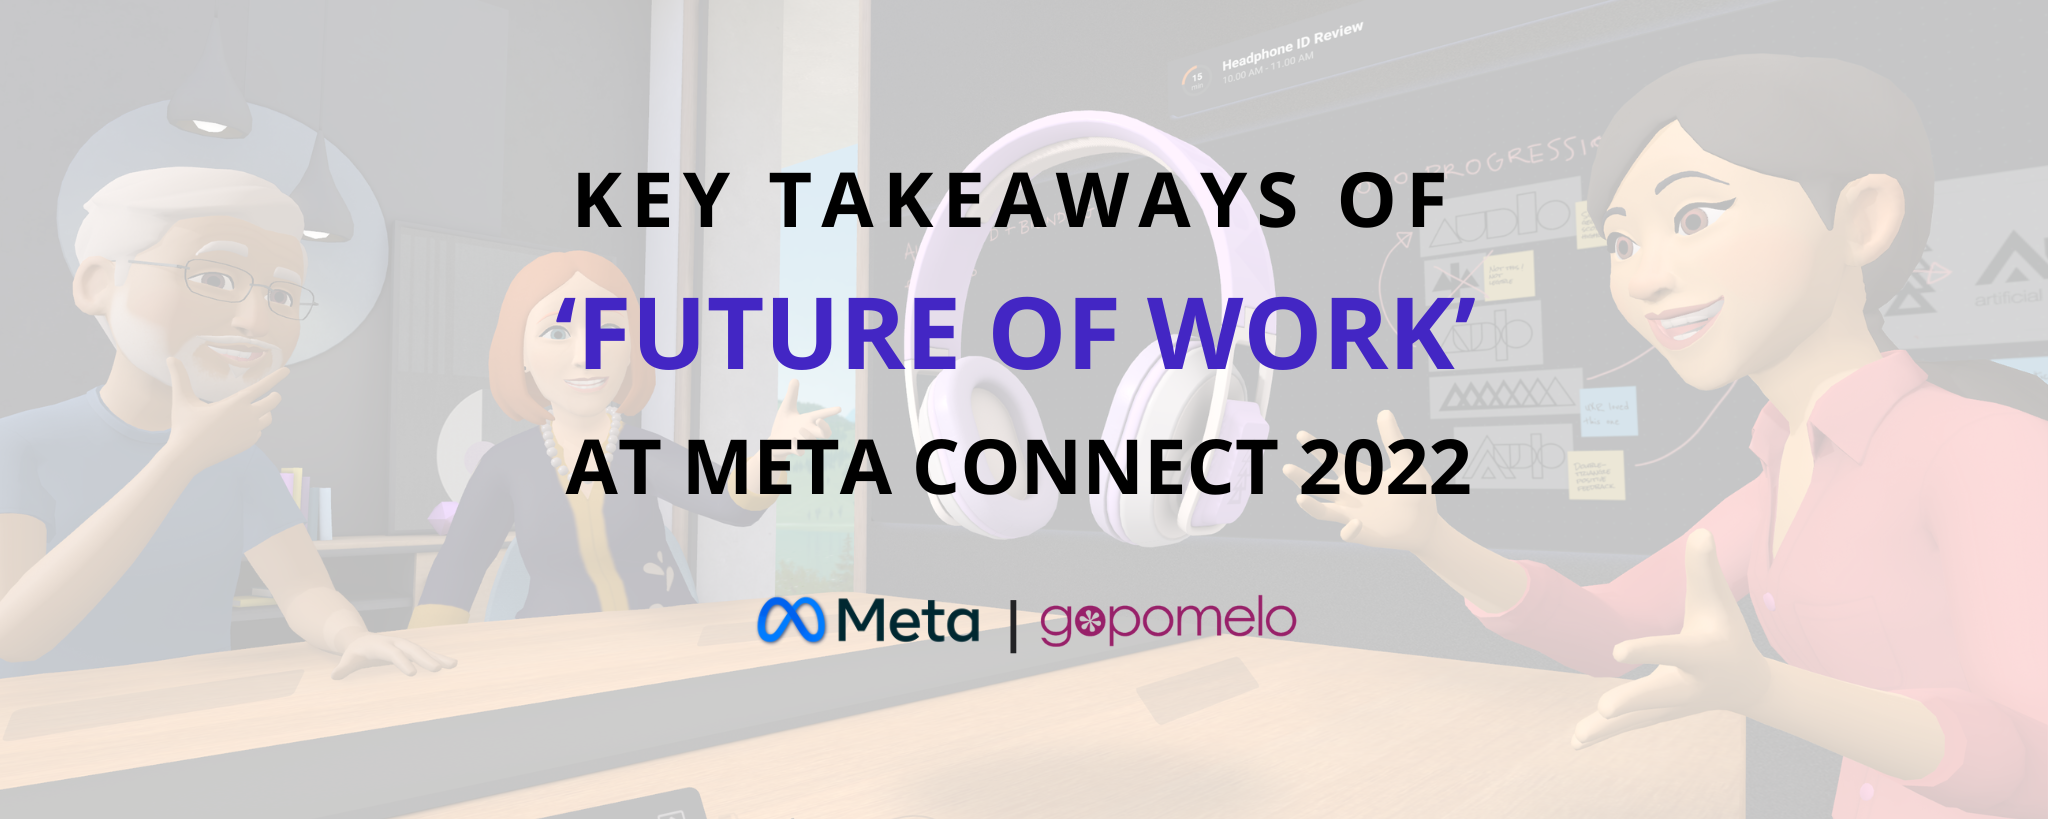 Key Takeaways of ‘Future of Work’ at Meta Connect 2022 | GoPomelo